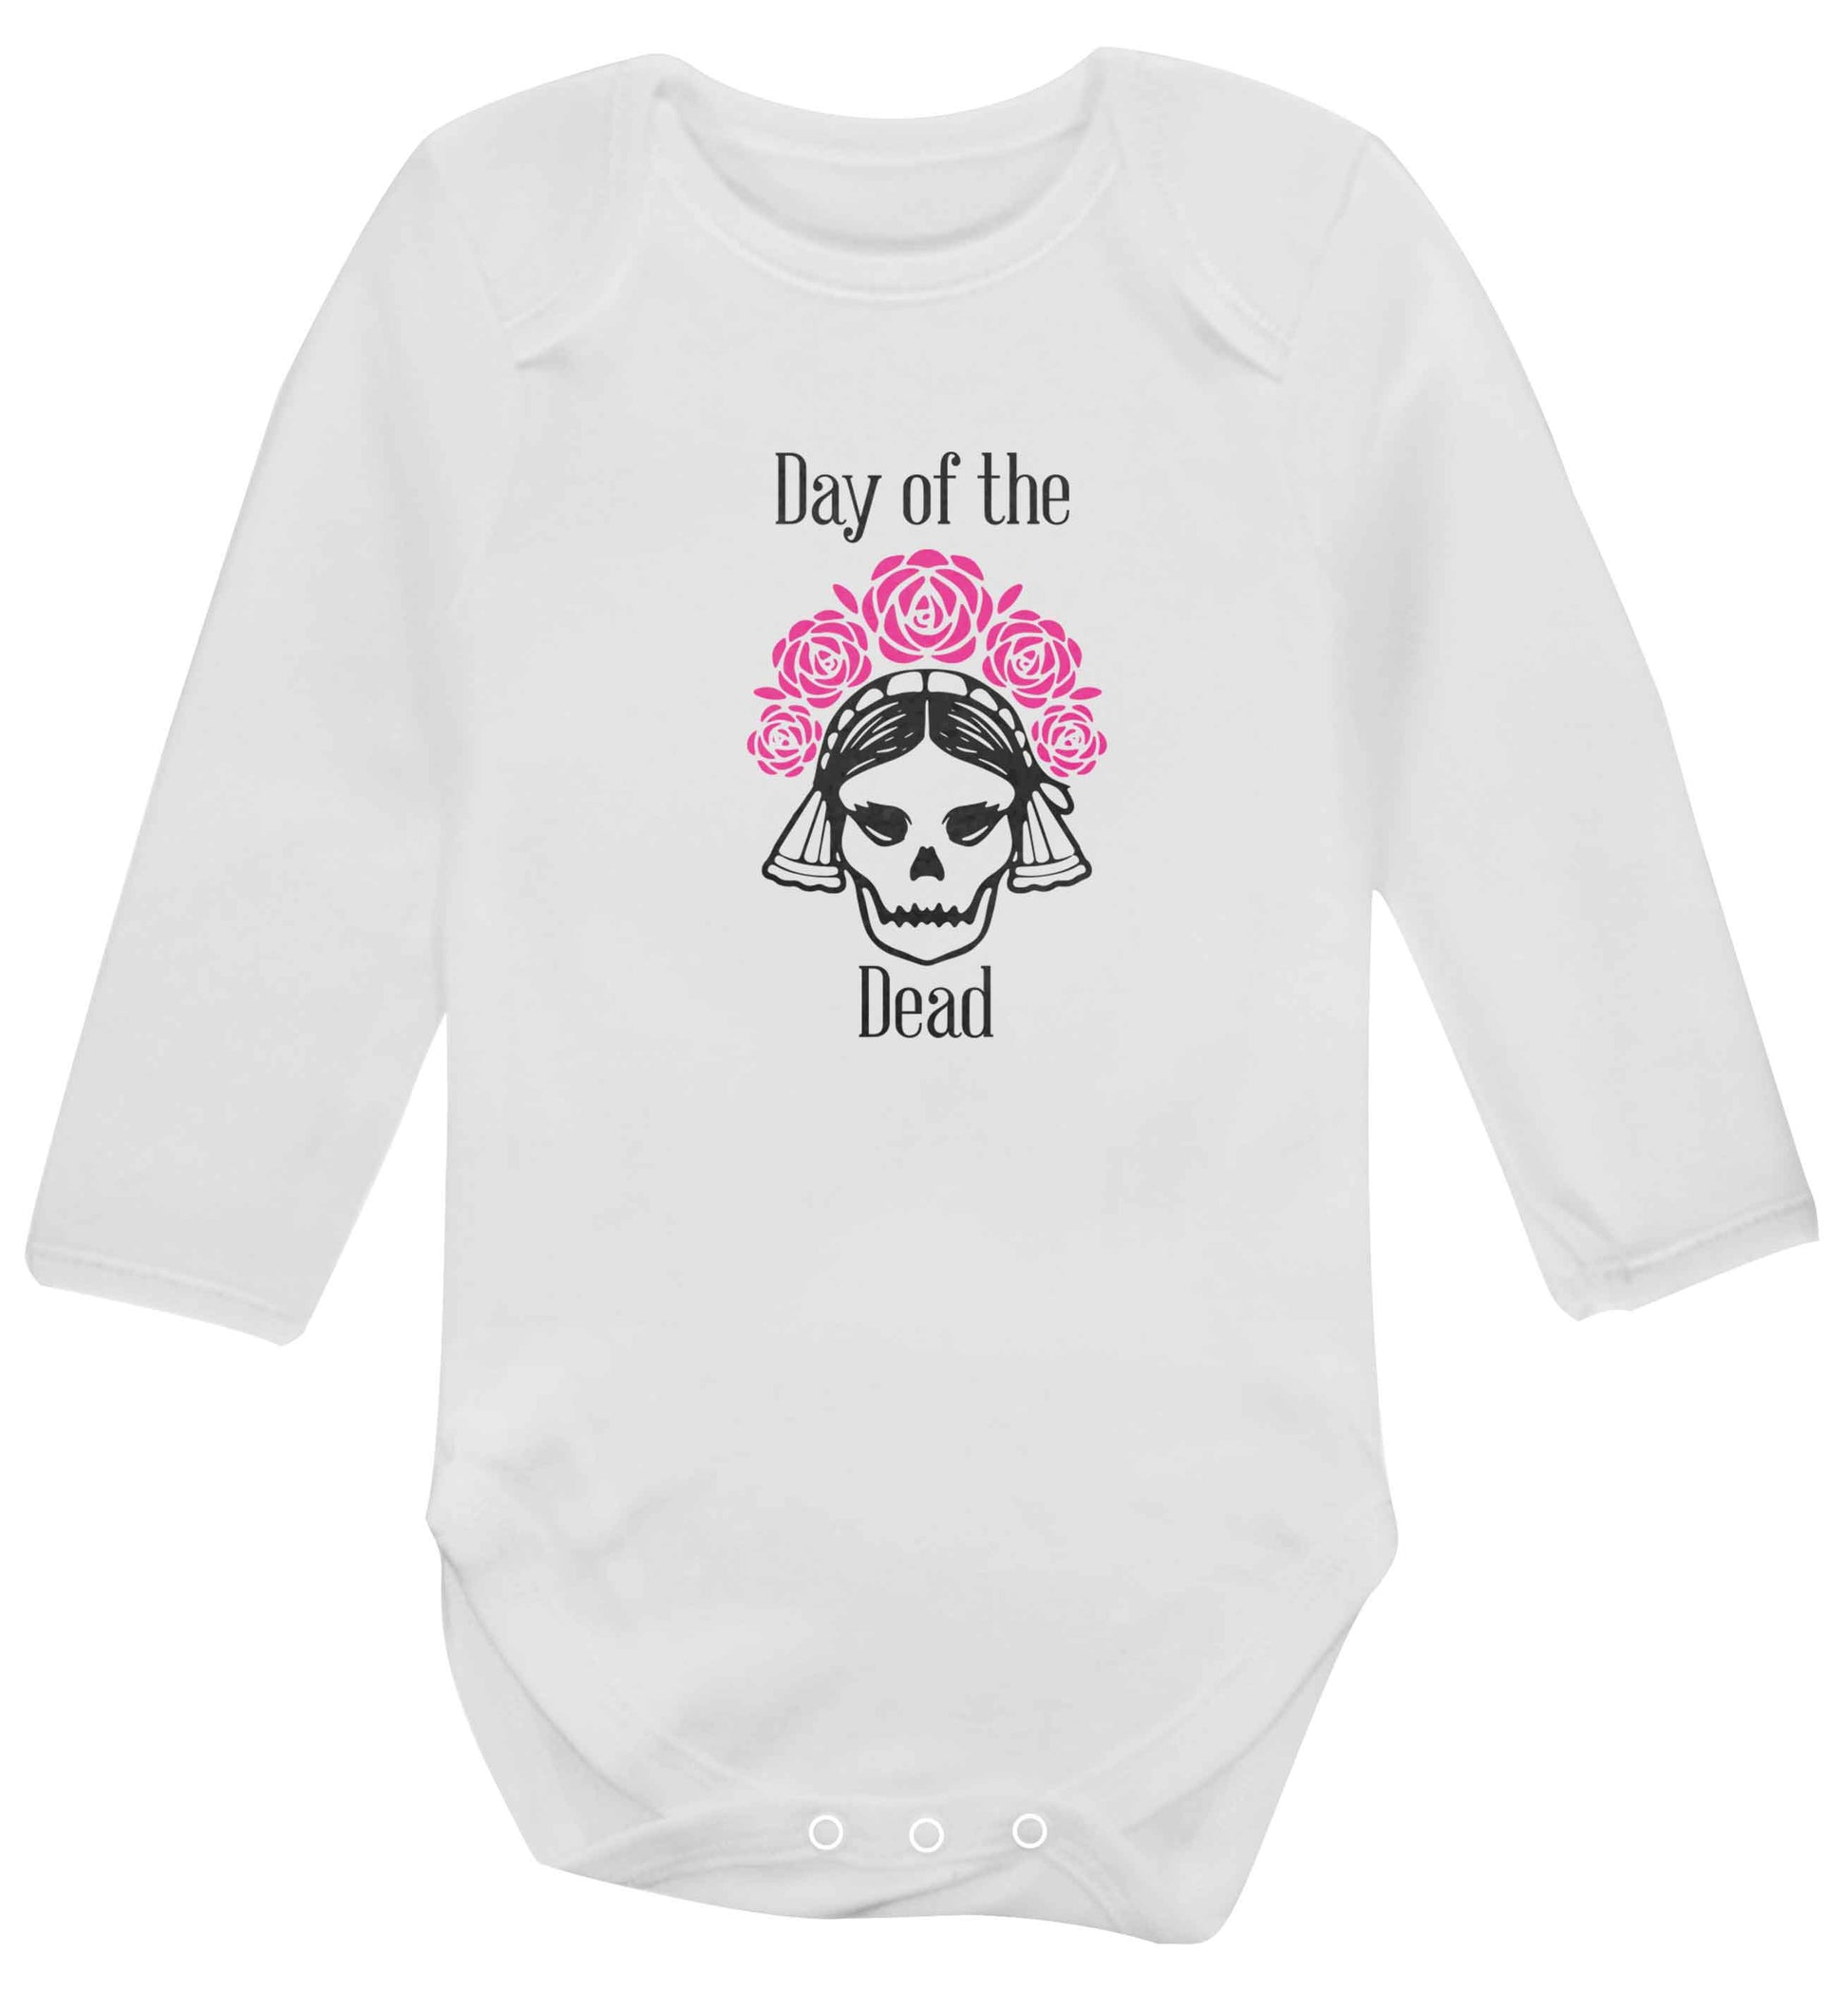 Day of the dead baby vest long sleeved white 6-12 months